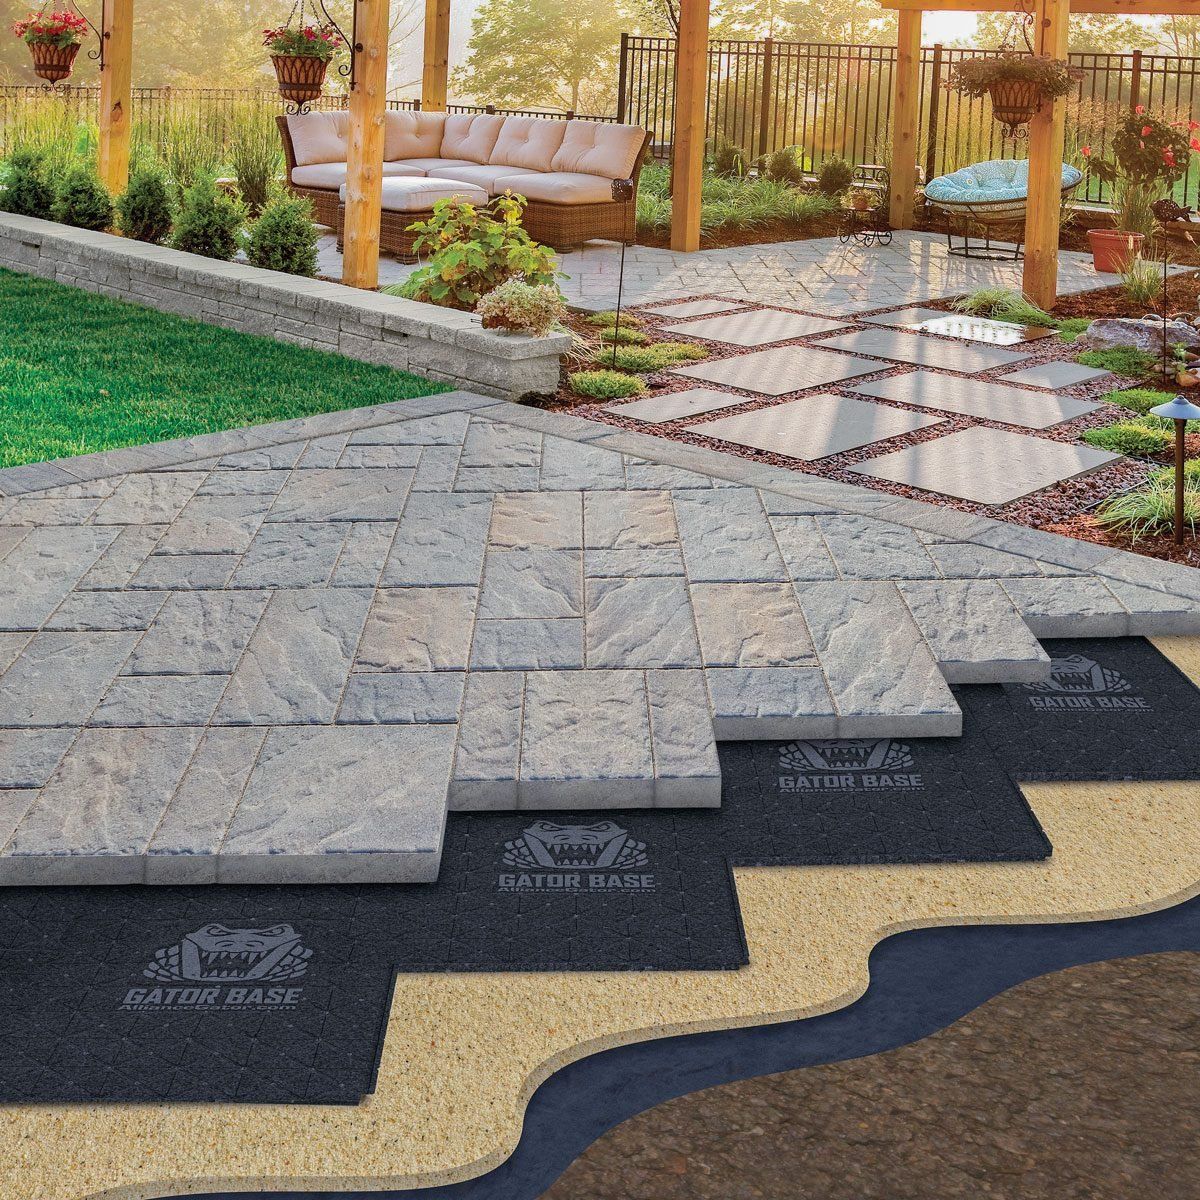 The Beauty and Versatility of Patio Pavers